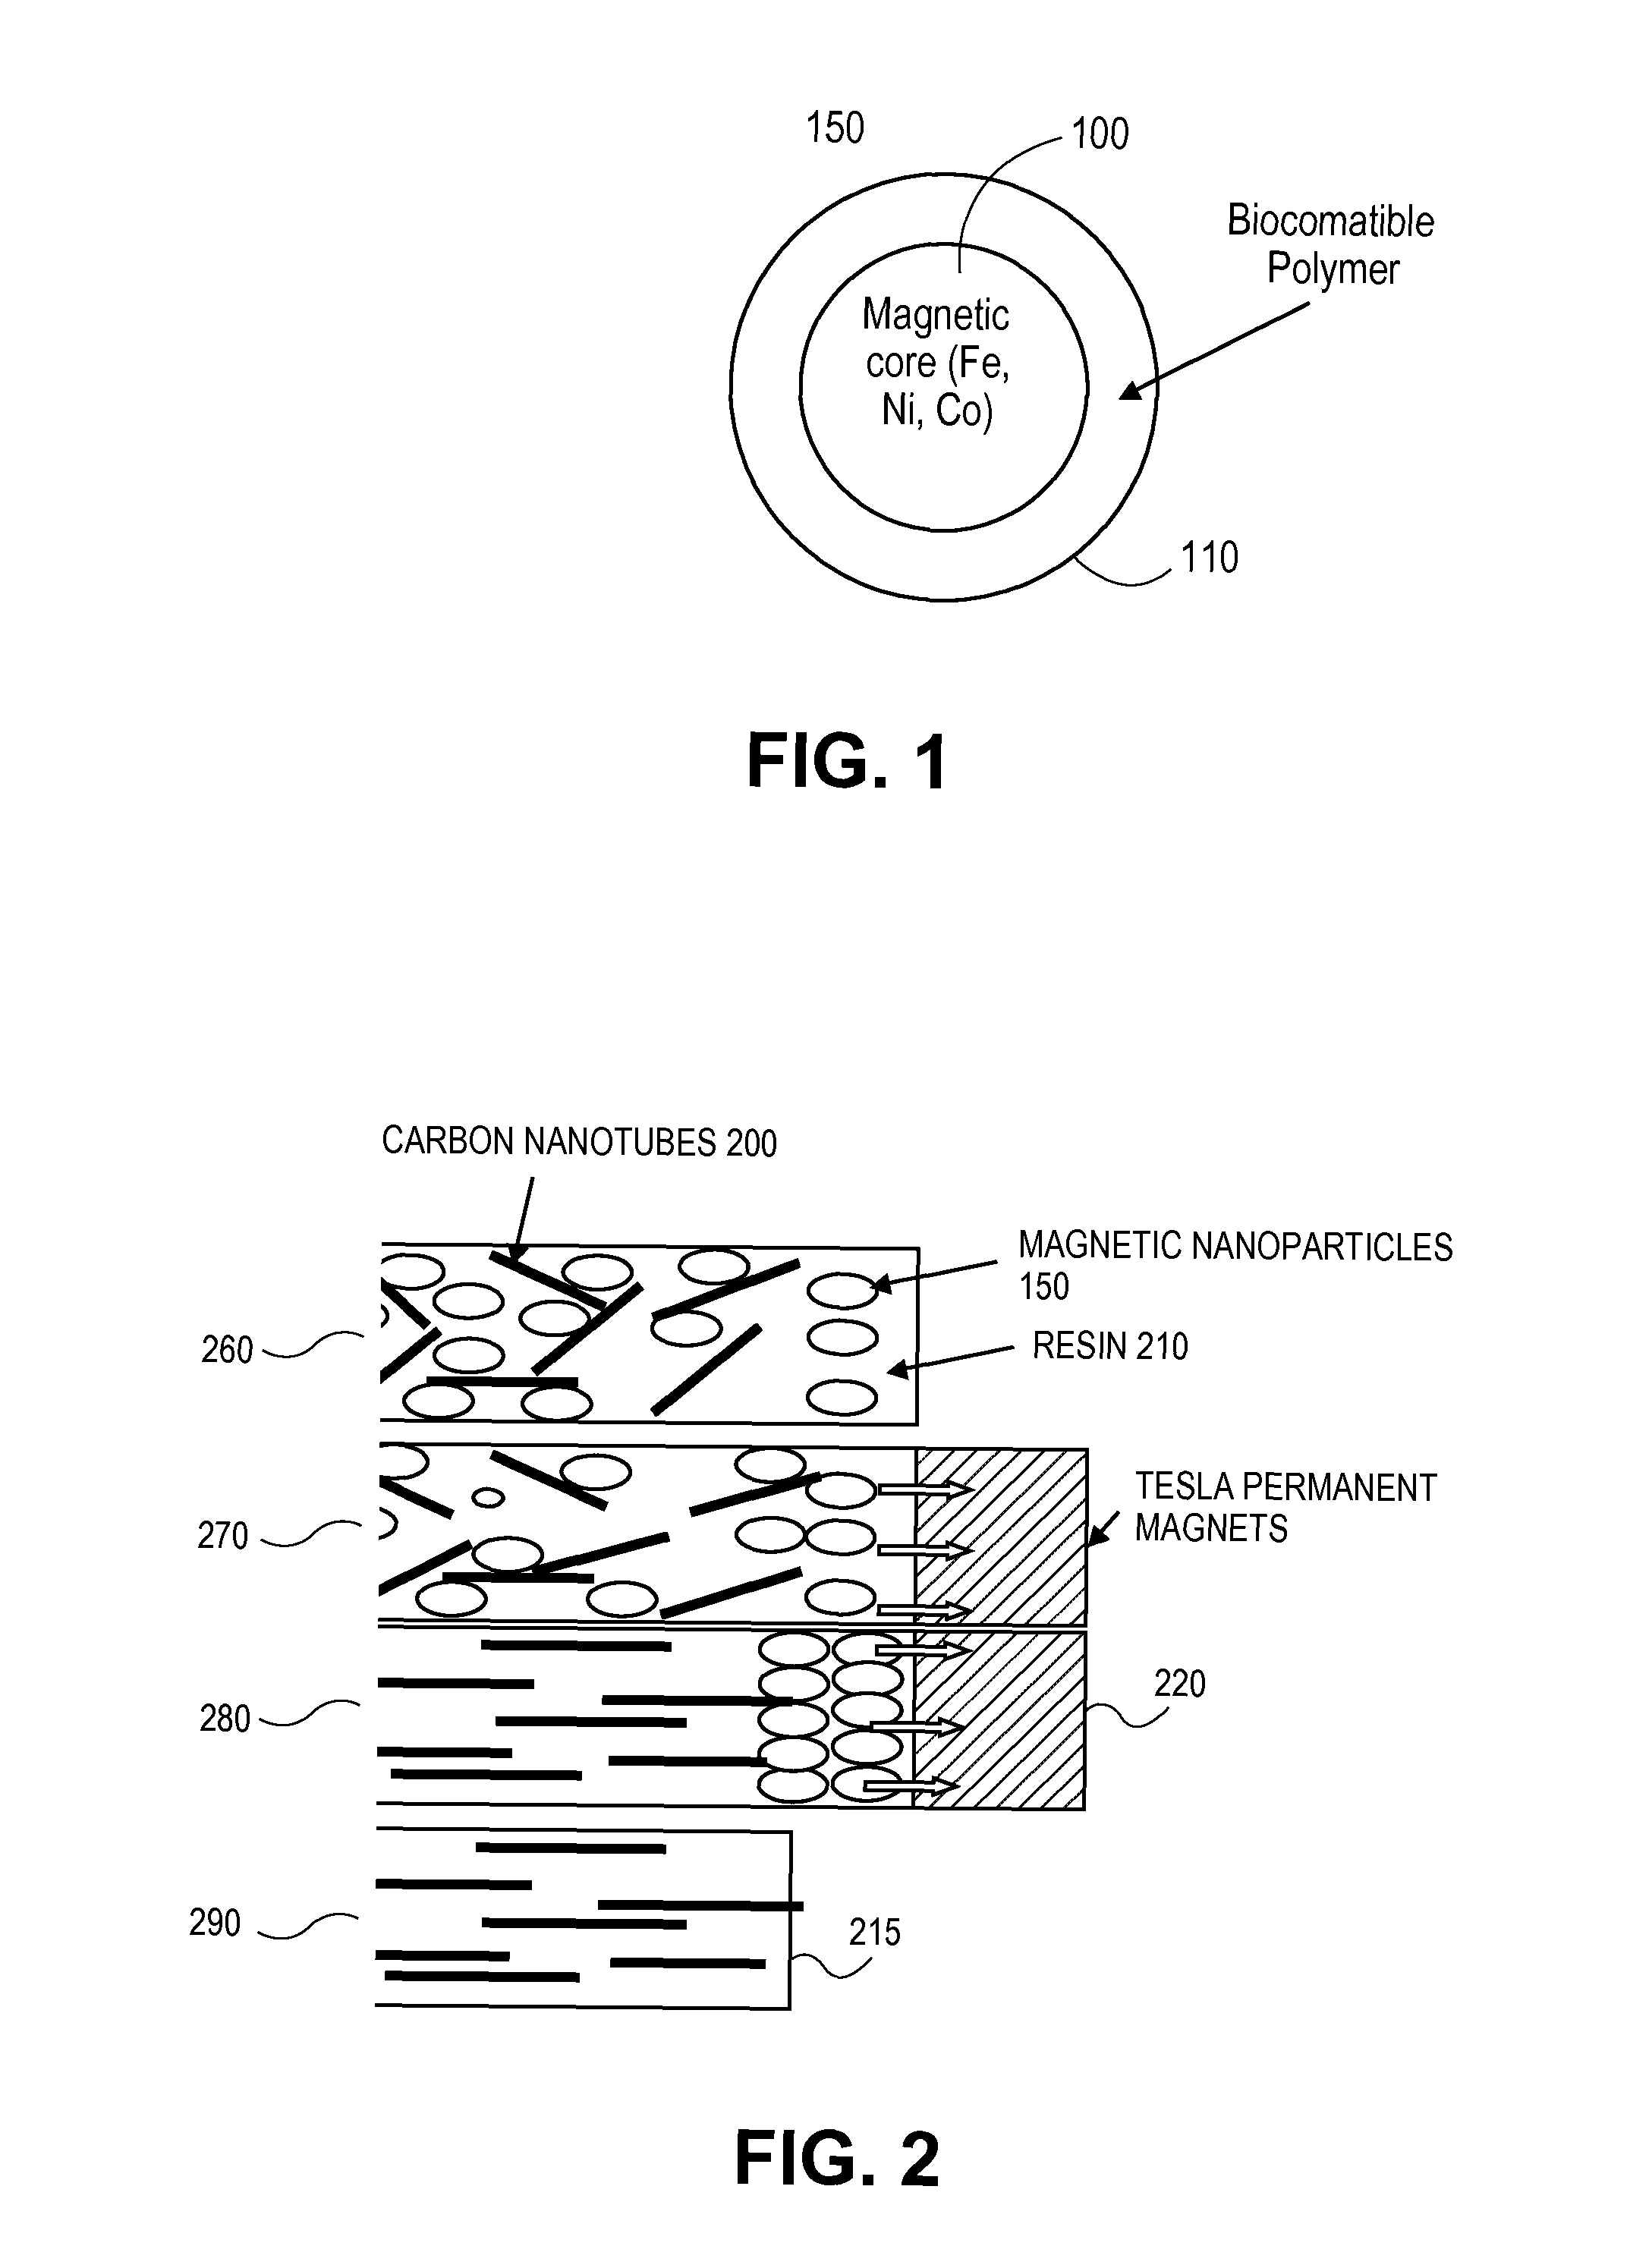 Dental compositions based on nanocomposites for use in filling and dental crowns